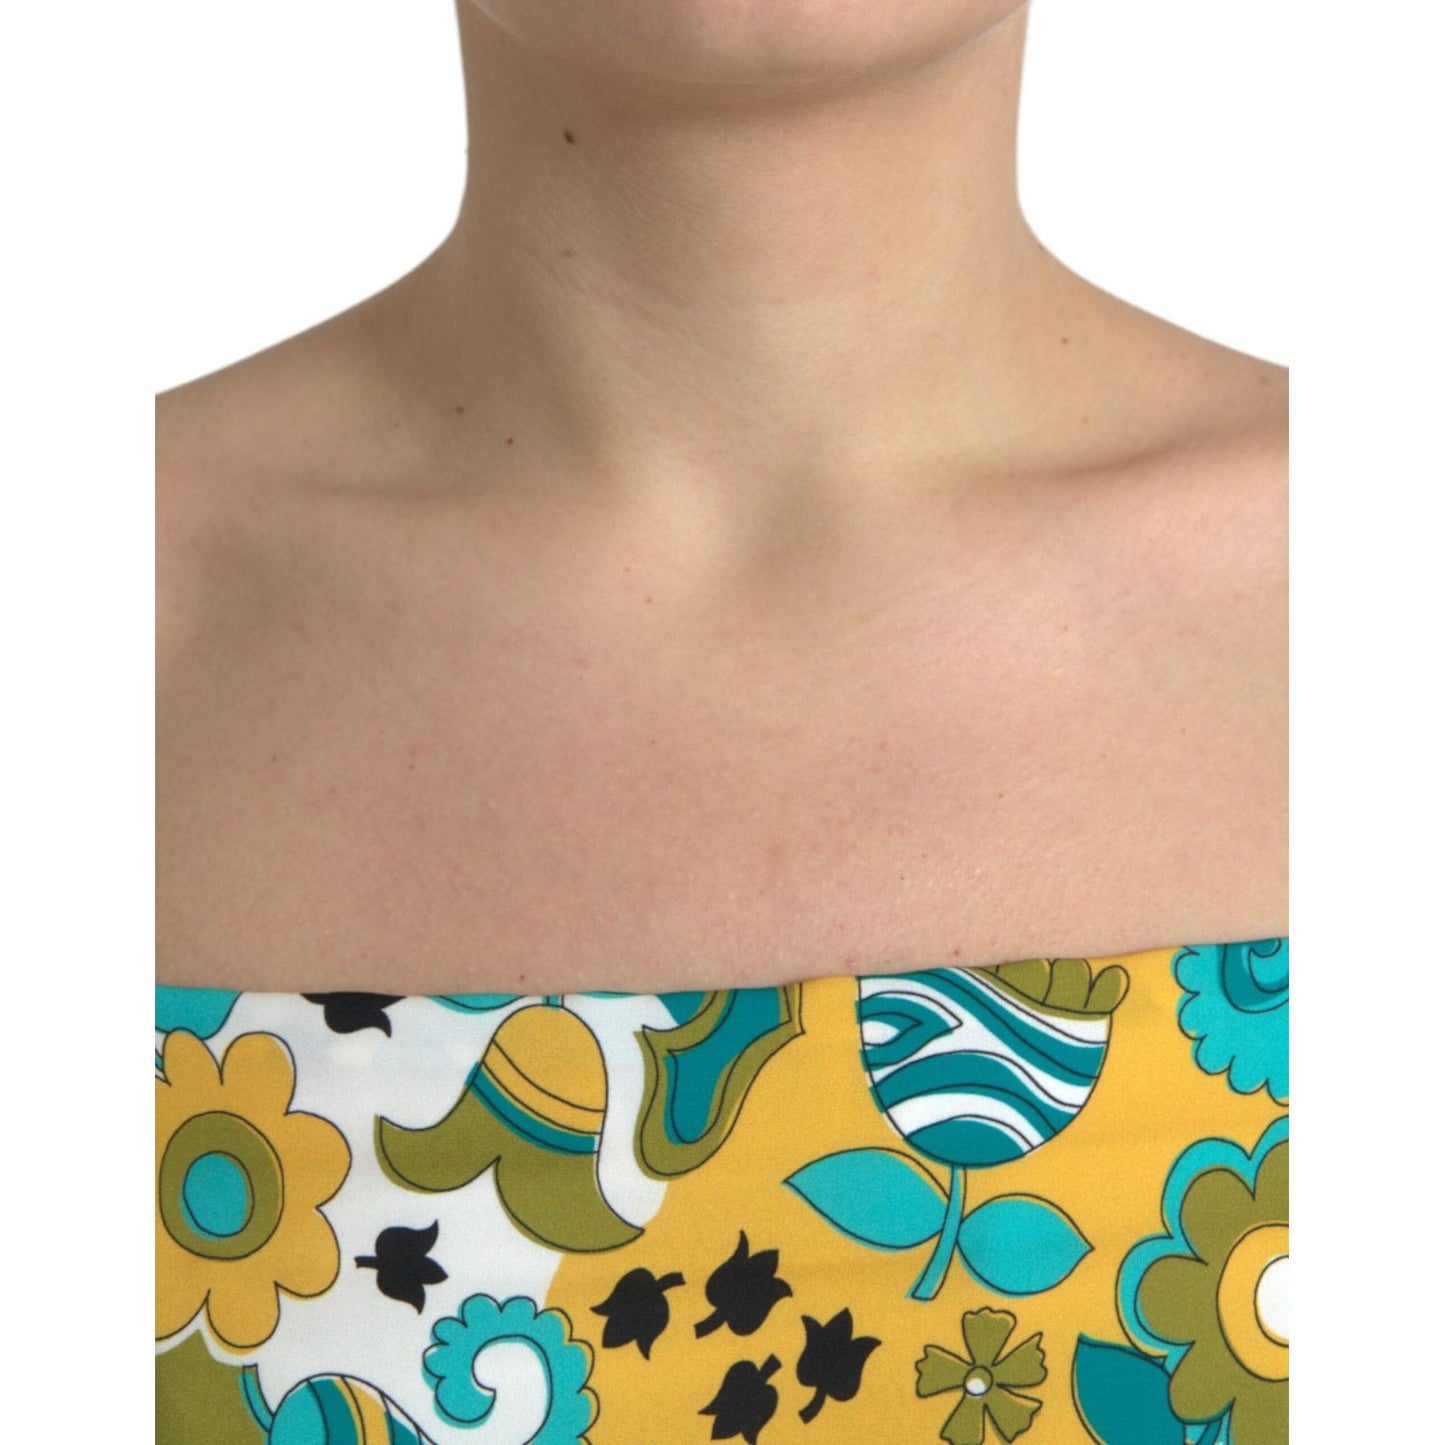 Dolce & Gabbana Elegant Floral Silk Blend Cropped Tank Top multicolor-floral-sleeveless-cropped-top